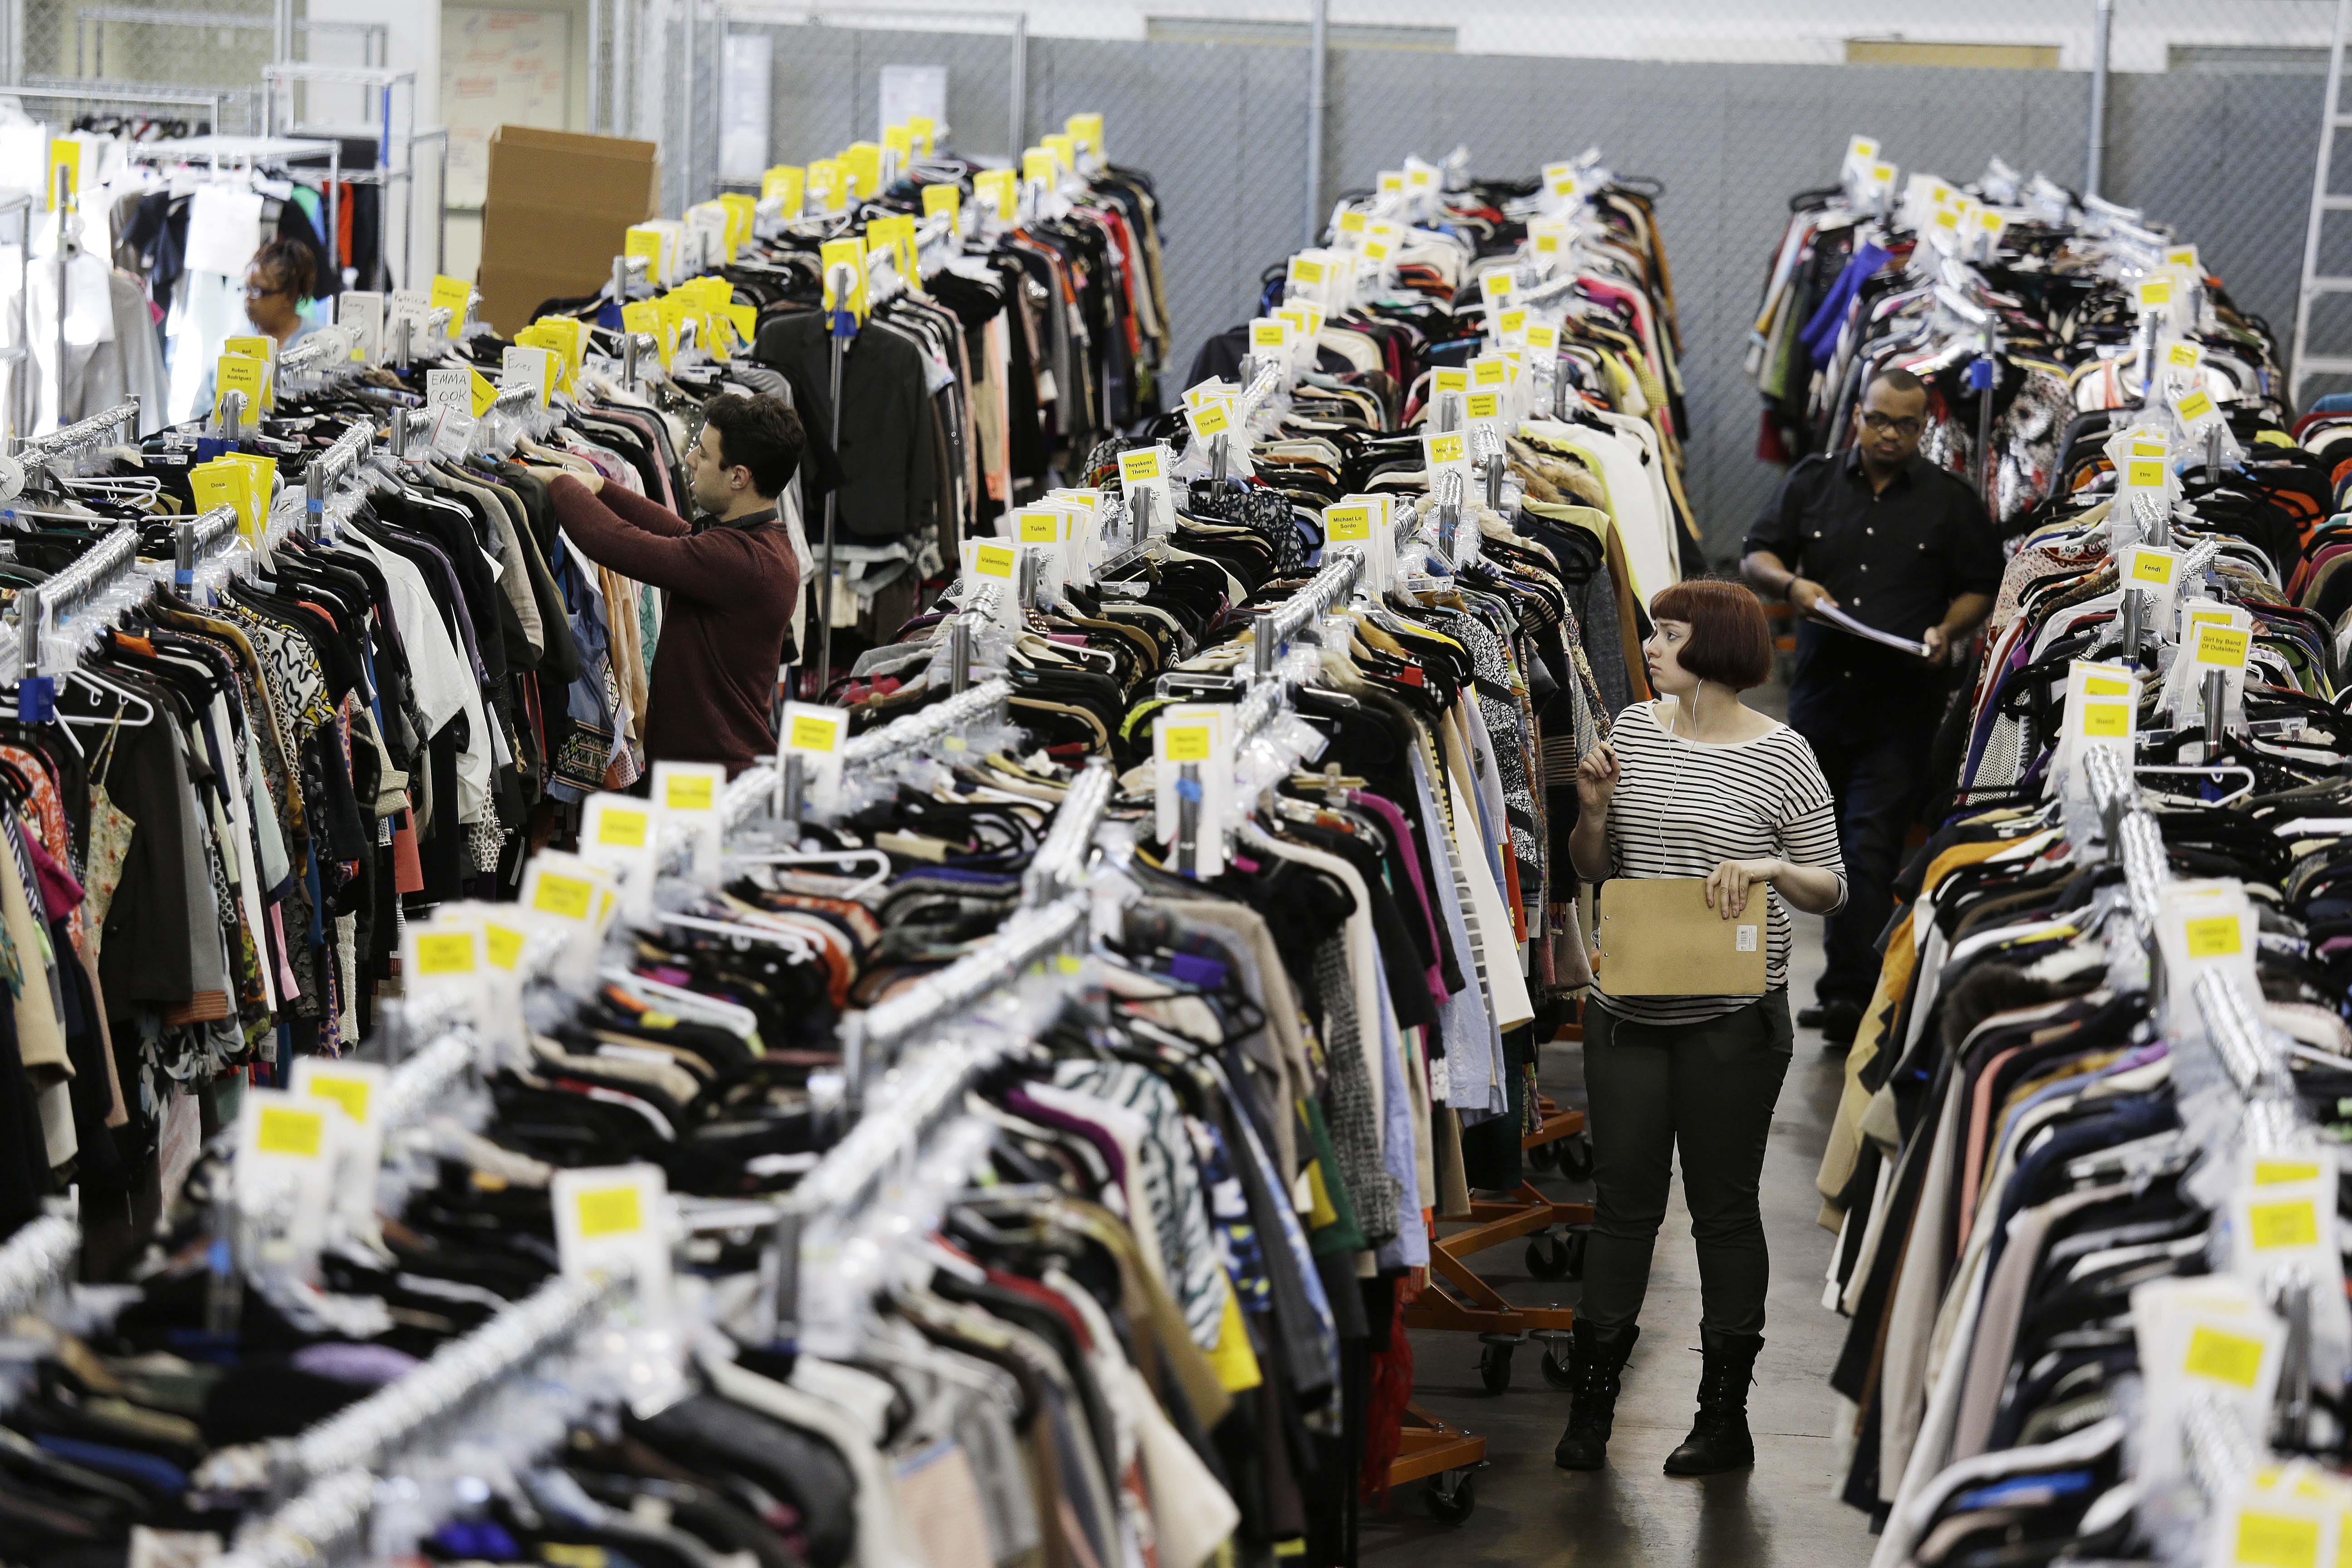 Want to resell your clothes? Or looking to spruce up your closet